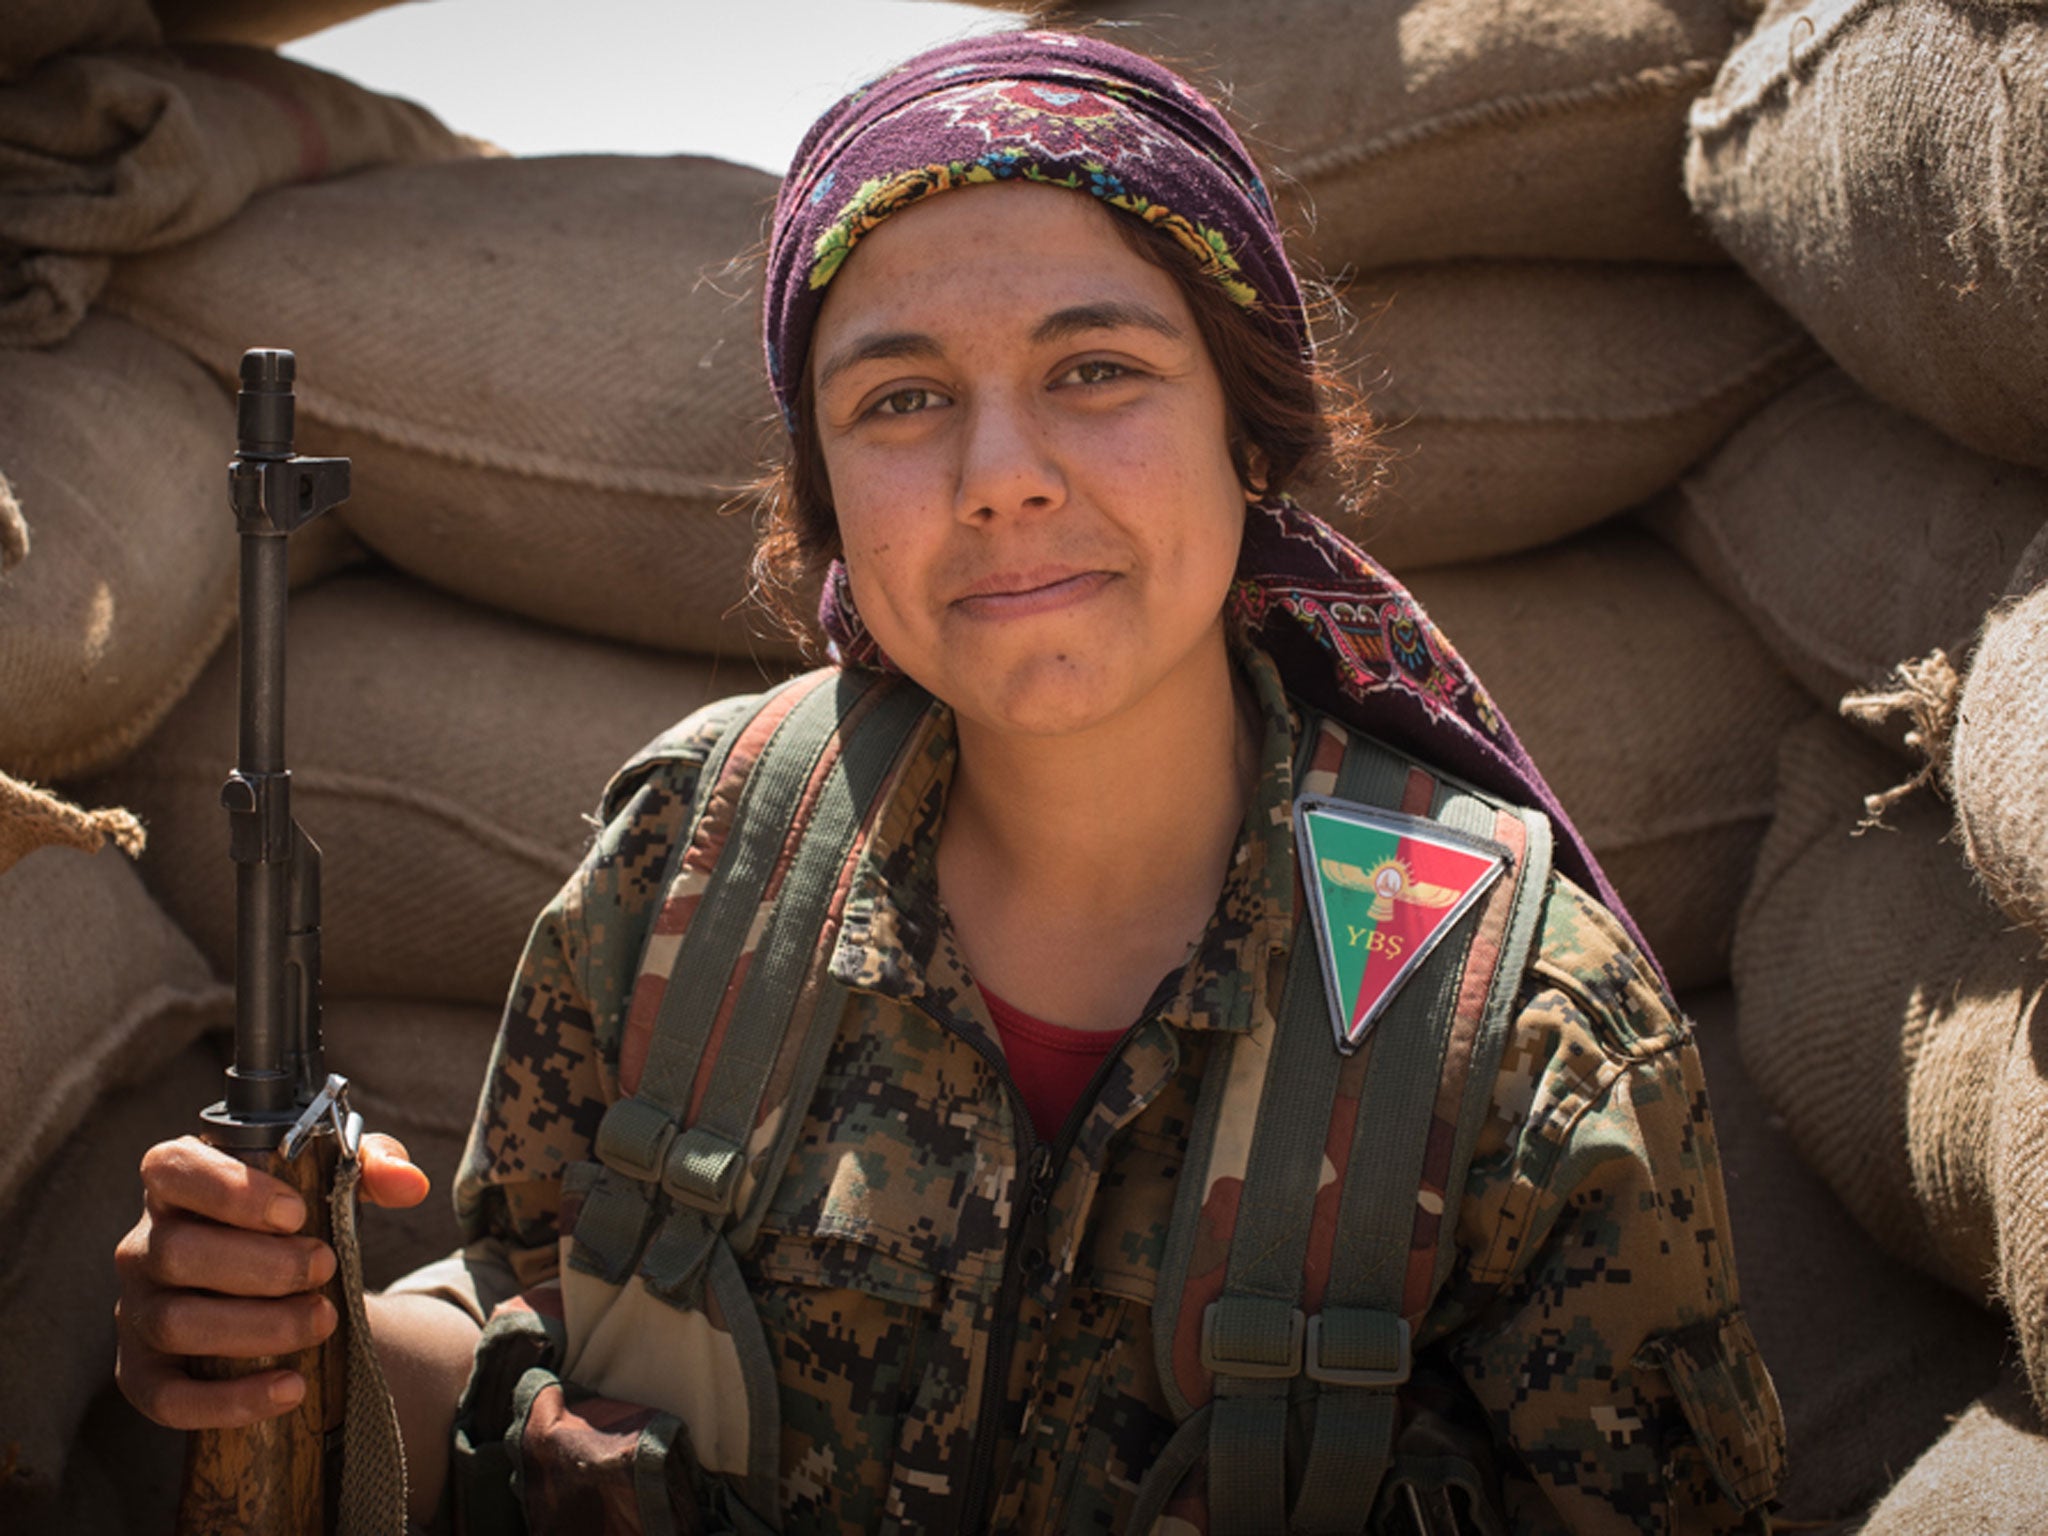 "We never played princesses as little girls," a 30-year-old YPG fighter jokes